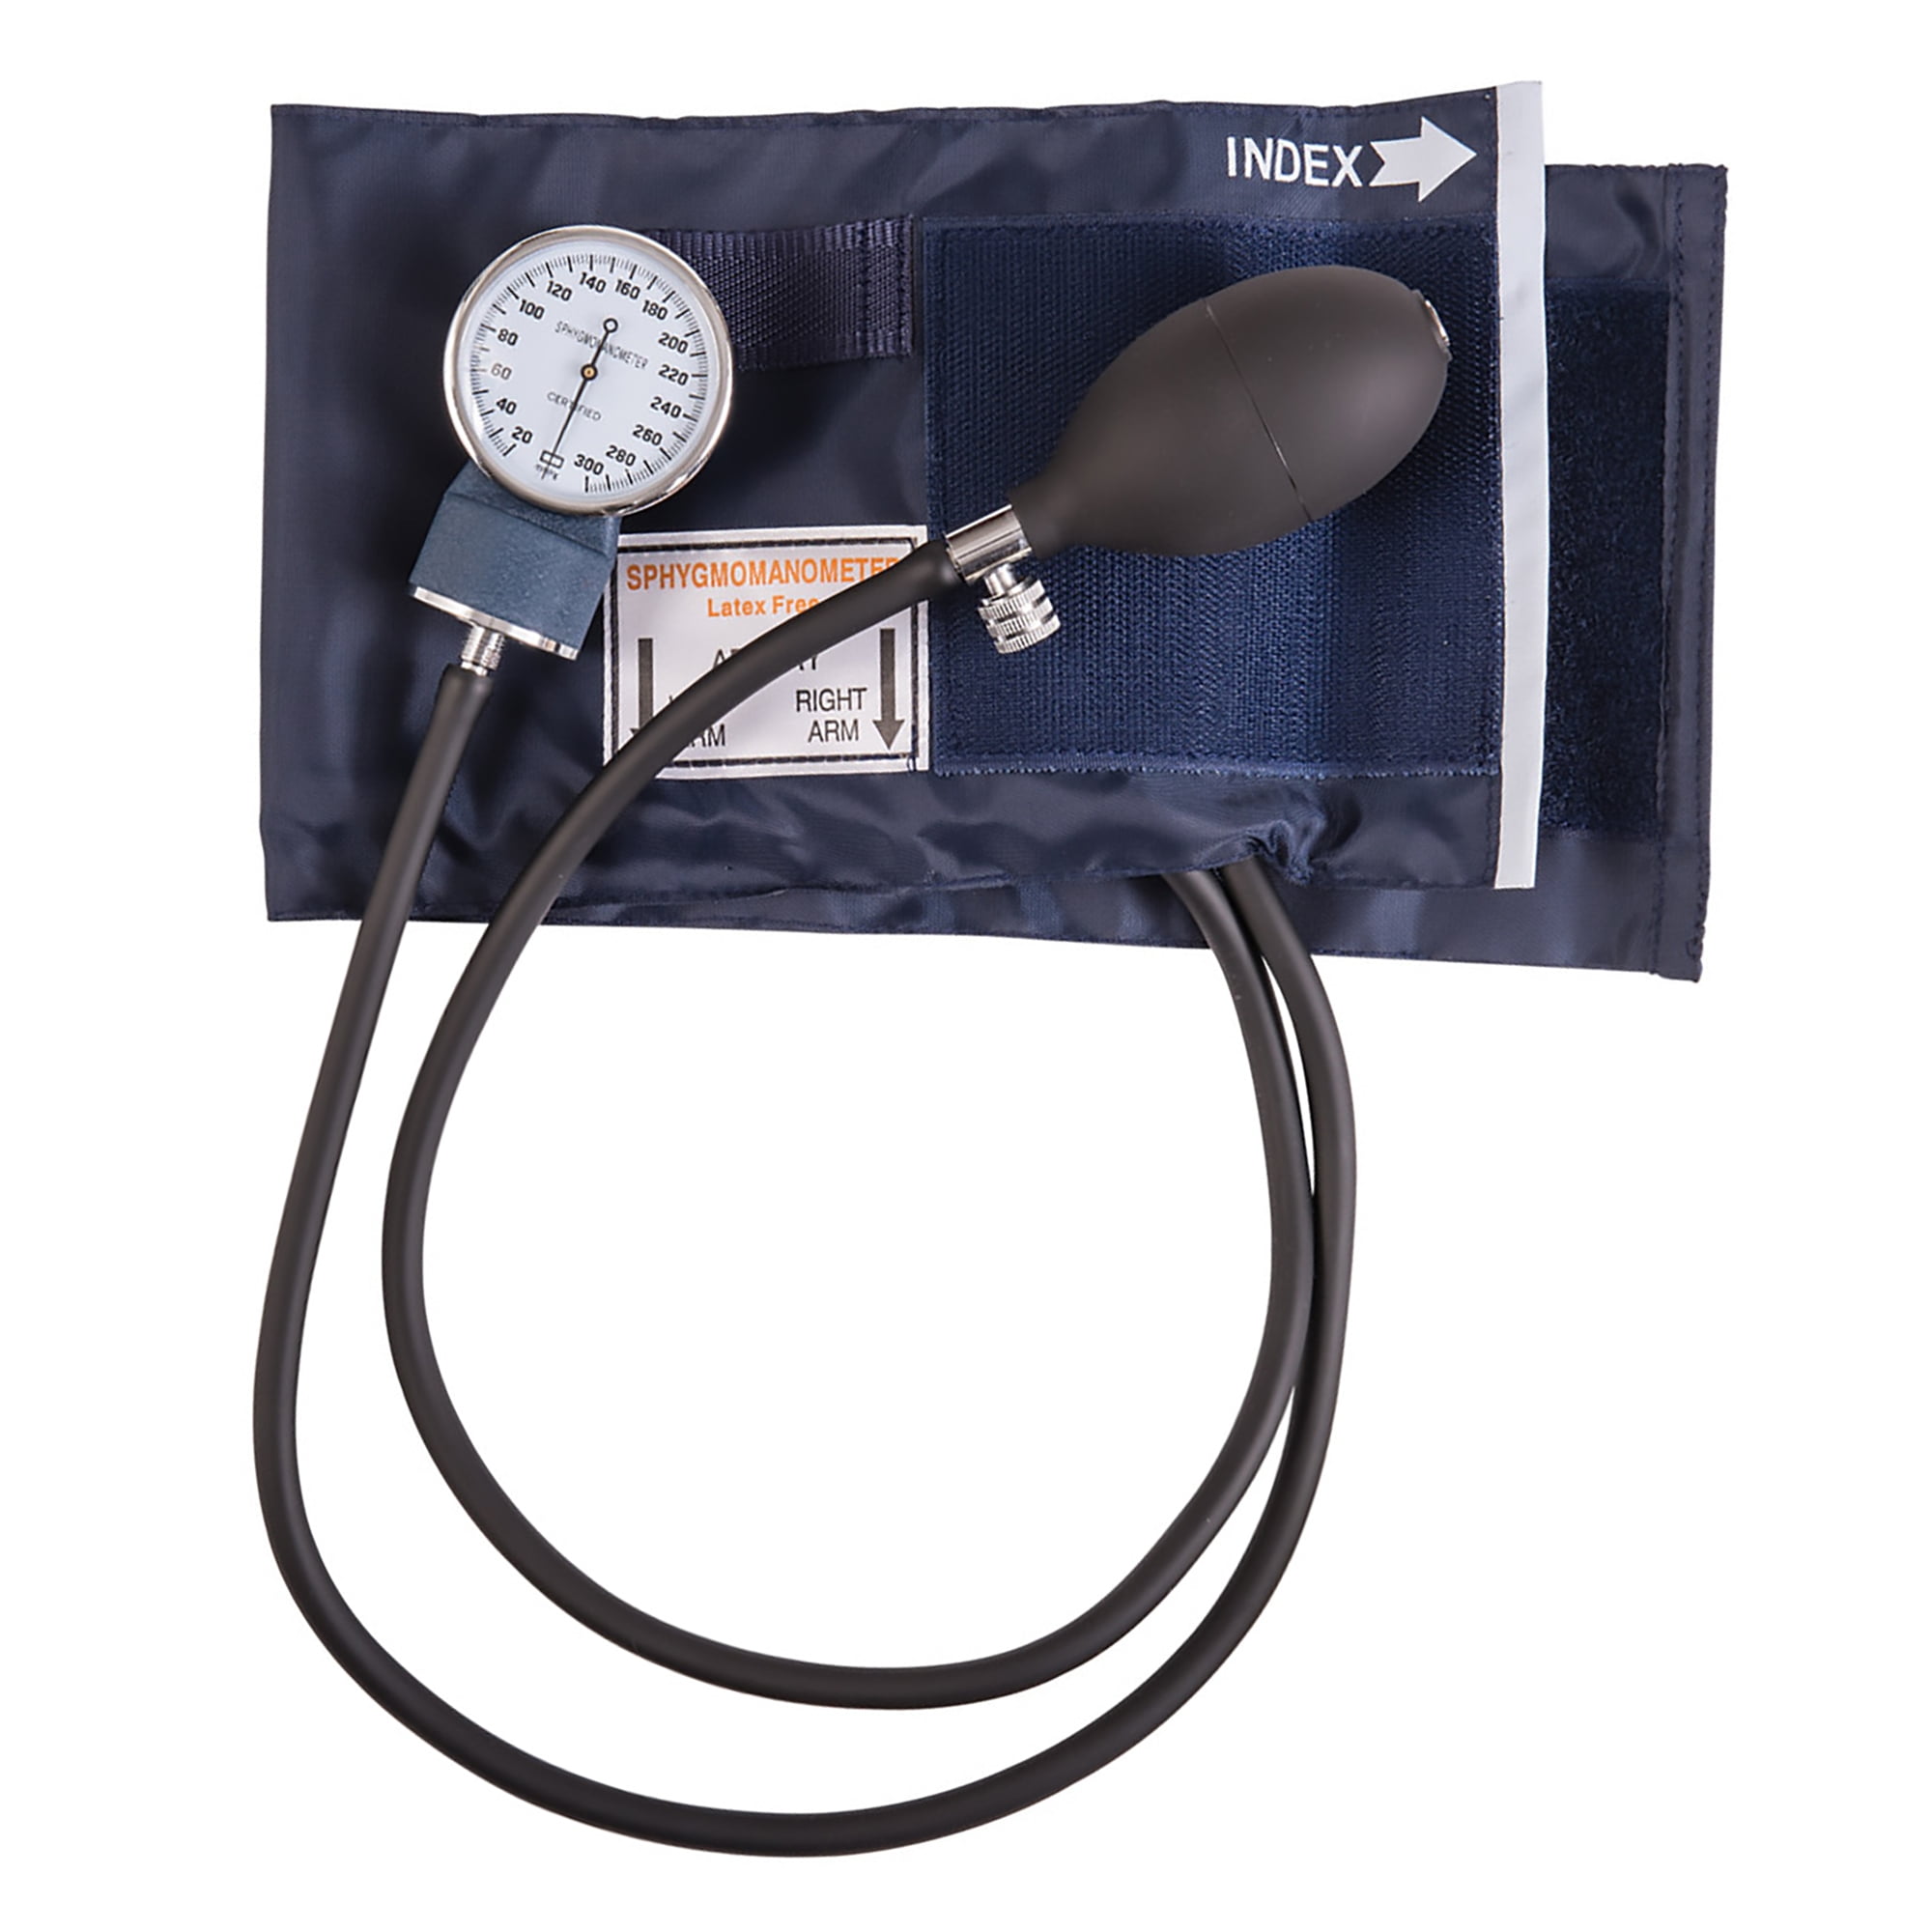 MABIS MatchMates Manual Blood Pressure Monitor Kit Aneroid Sphygmomanometer  with Calibrated Nylon Cuff and Oversized Carrying Case, FSA and HSA